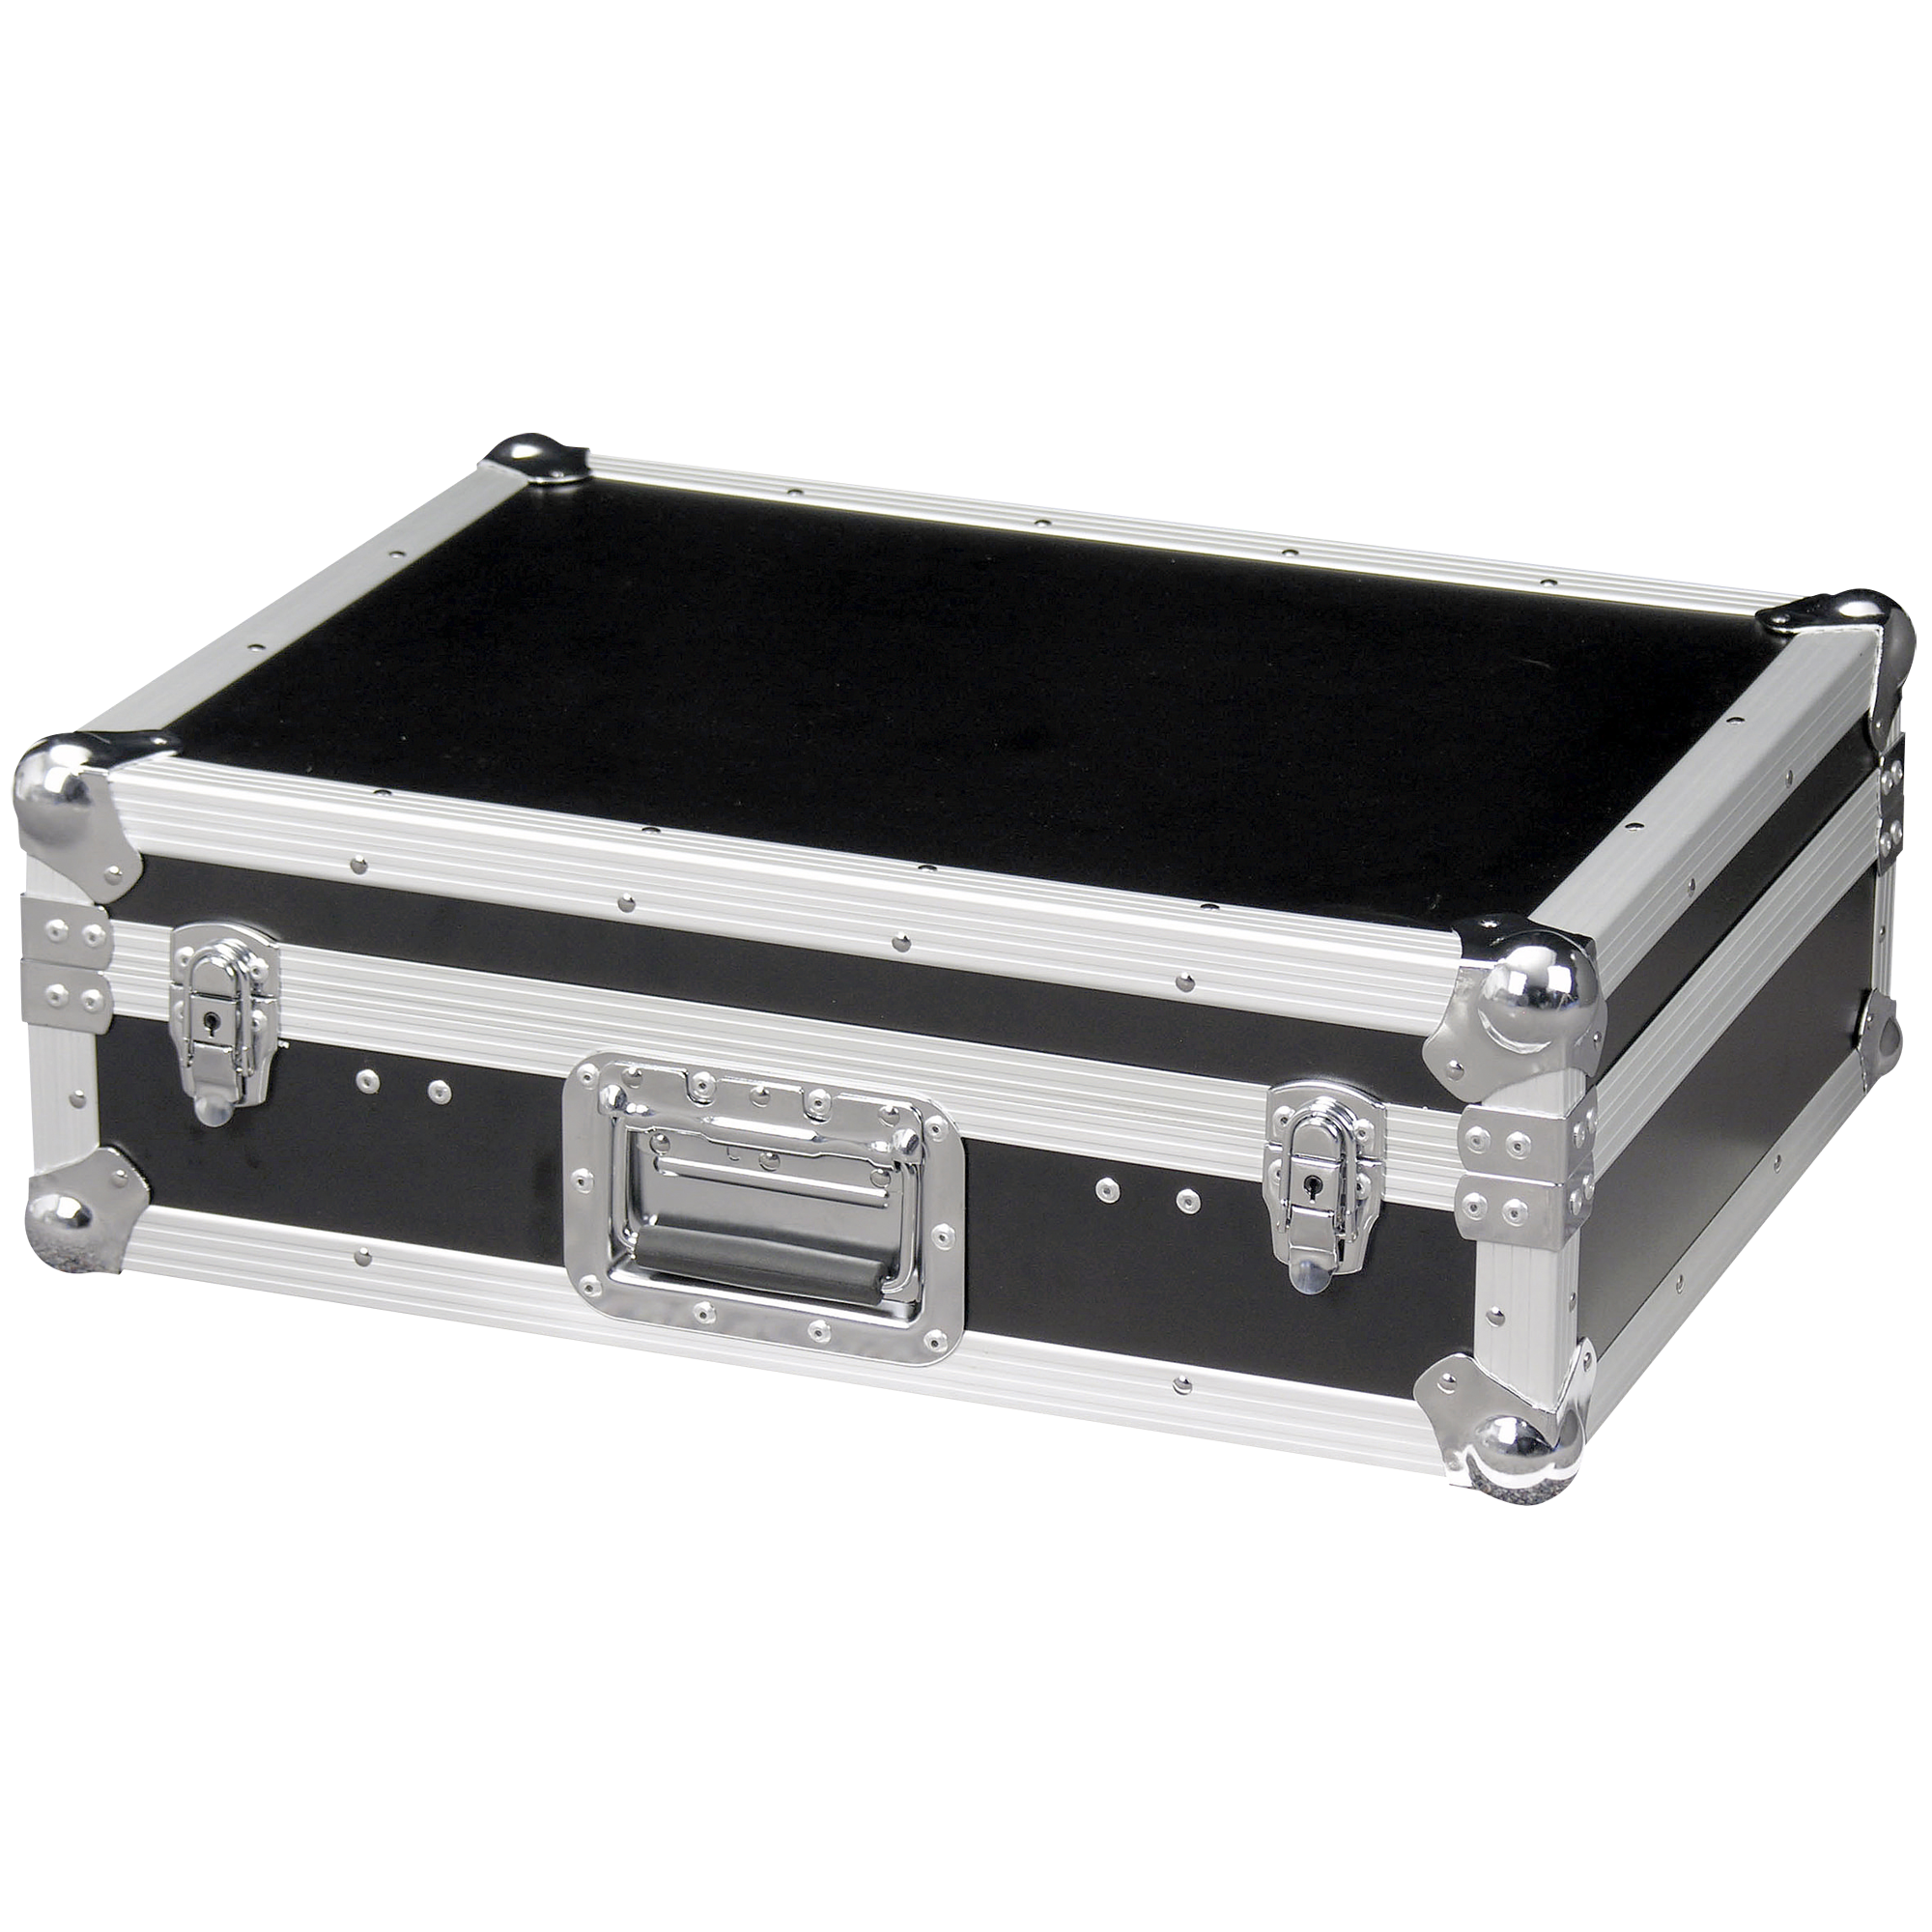 Showgear Flight Case for 170 CDs With 4 compartments